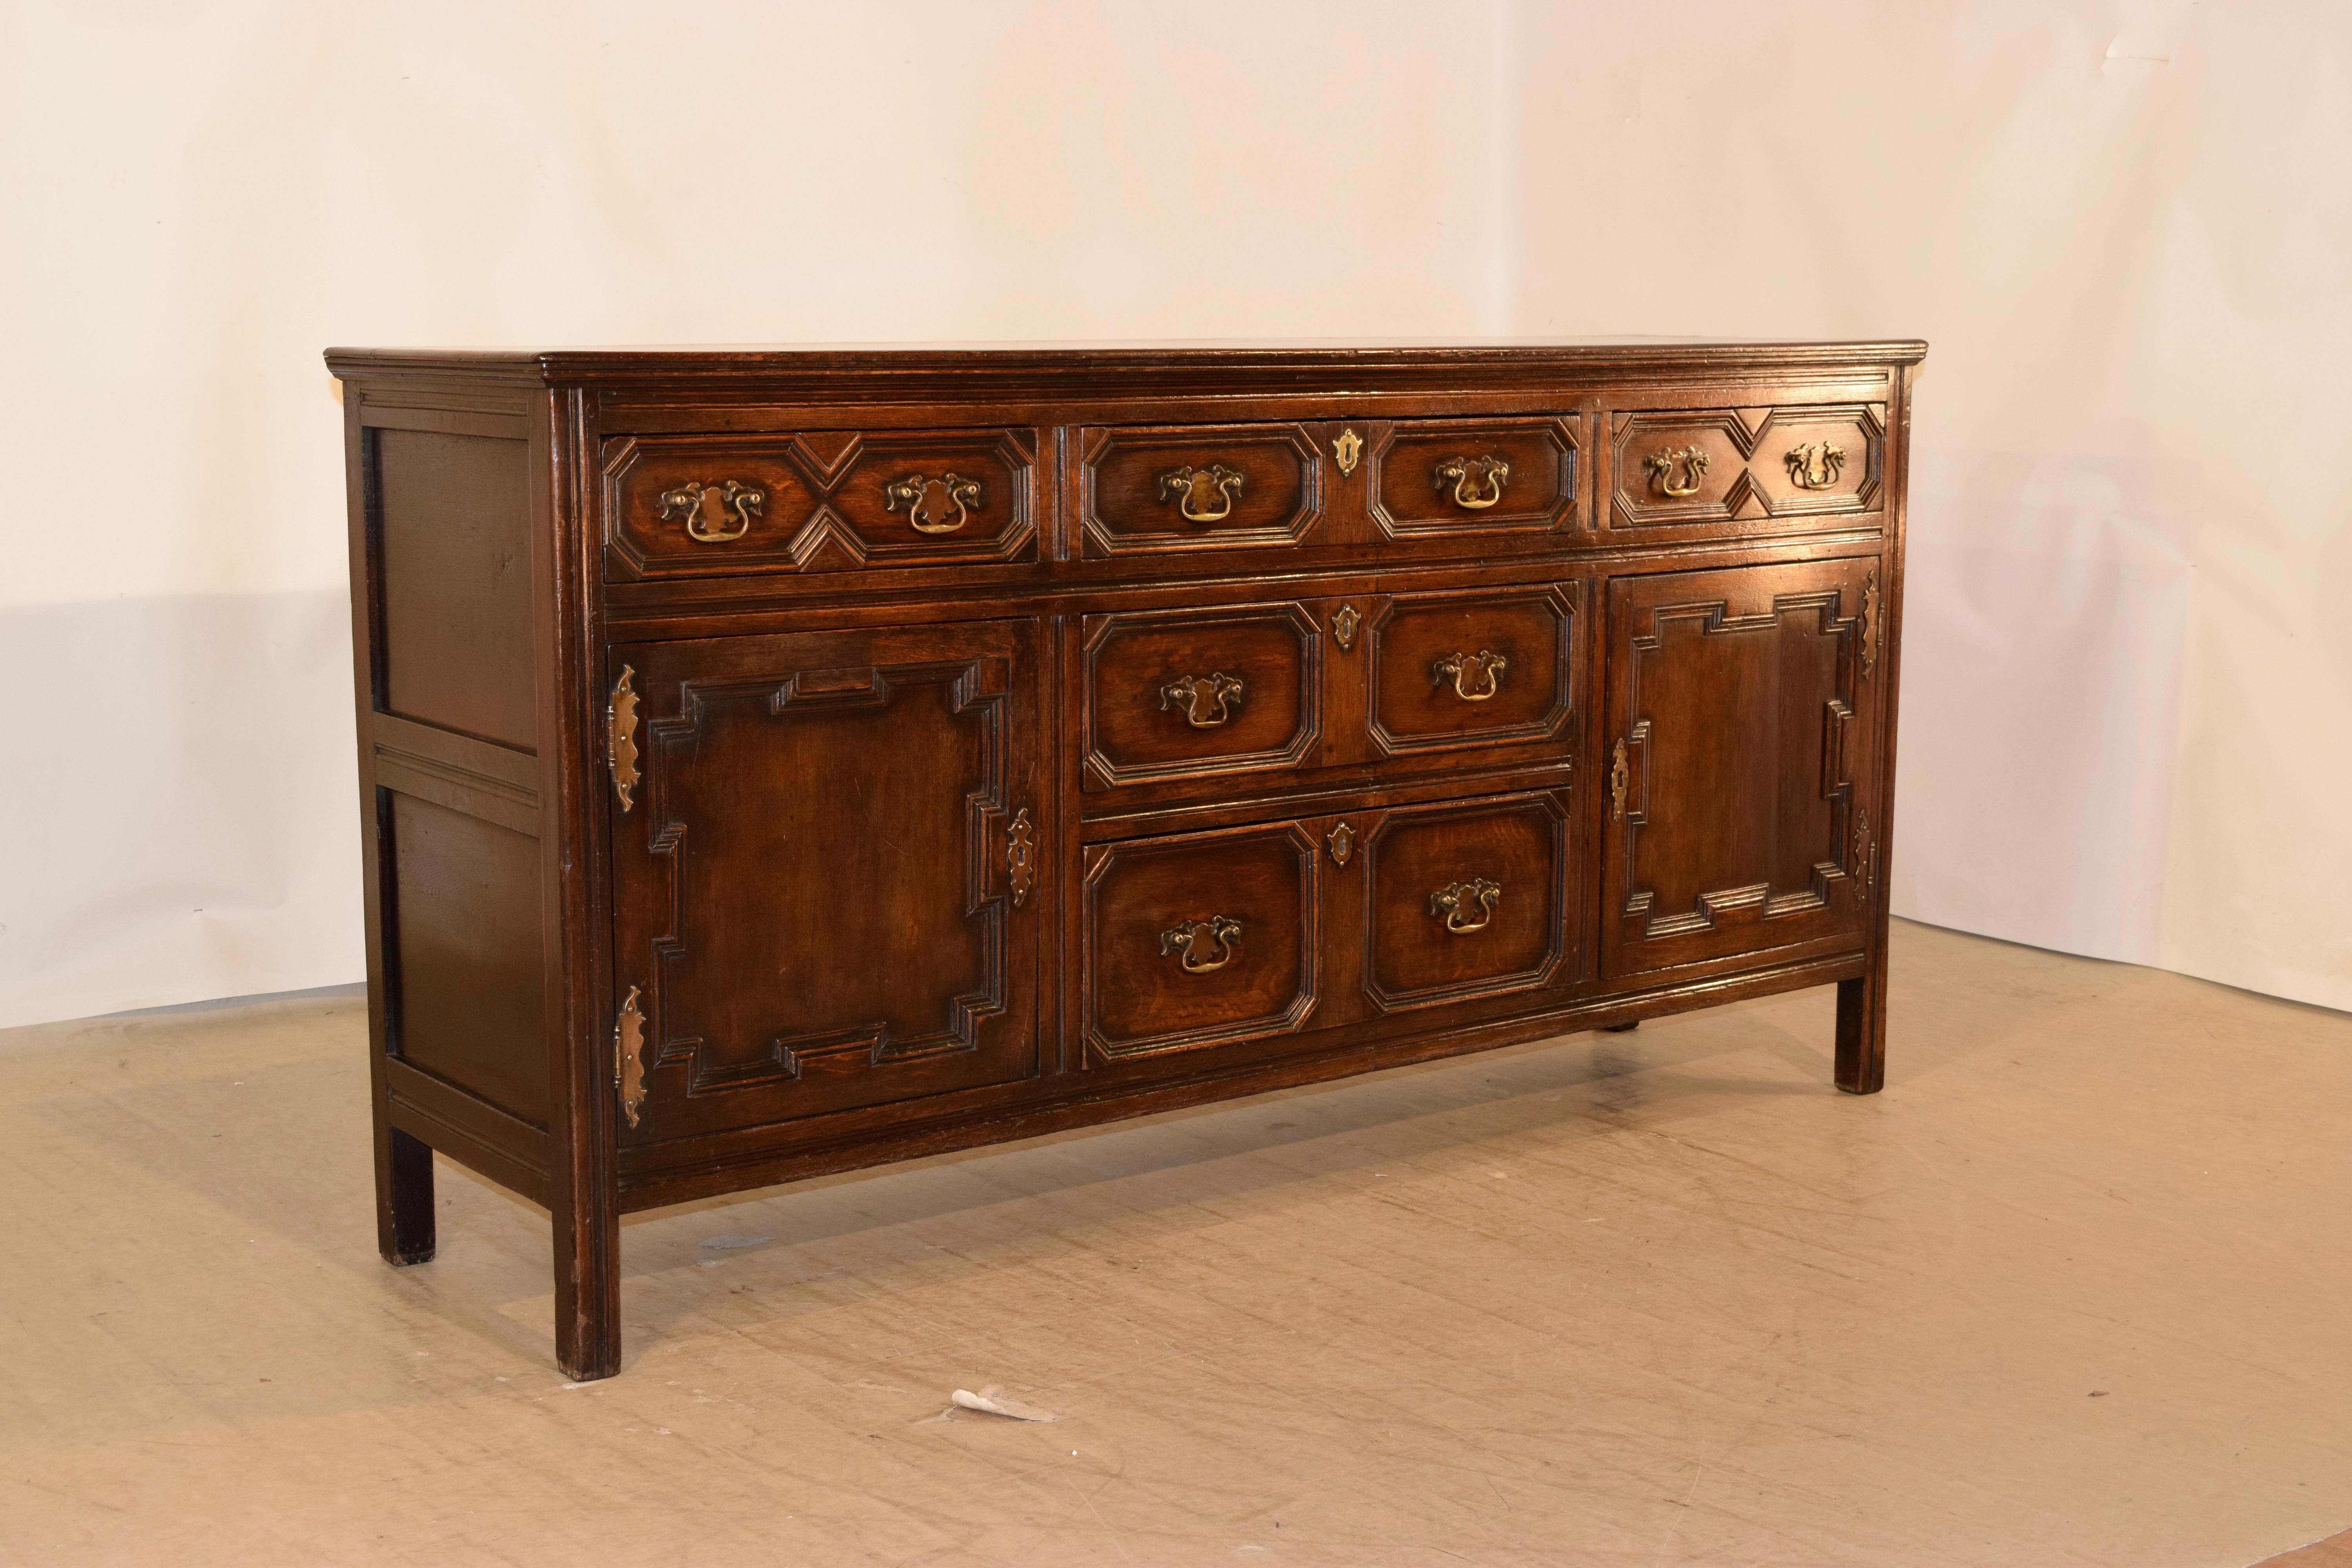 Circa 1720 English oak dresser base with a beveled edge around the top following down to paneled sides. The case has three geometrically paneled drawers over two central geometrically paneled drawers, which are flanked by geometrically raised